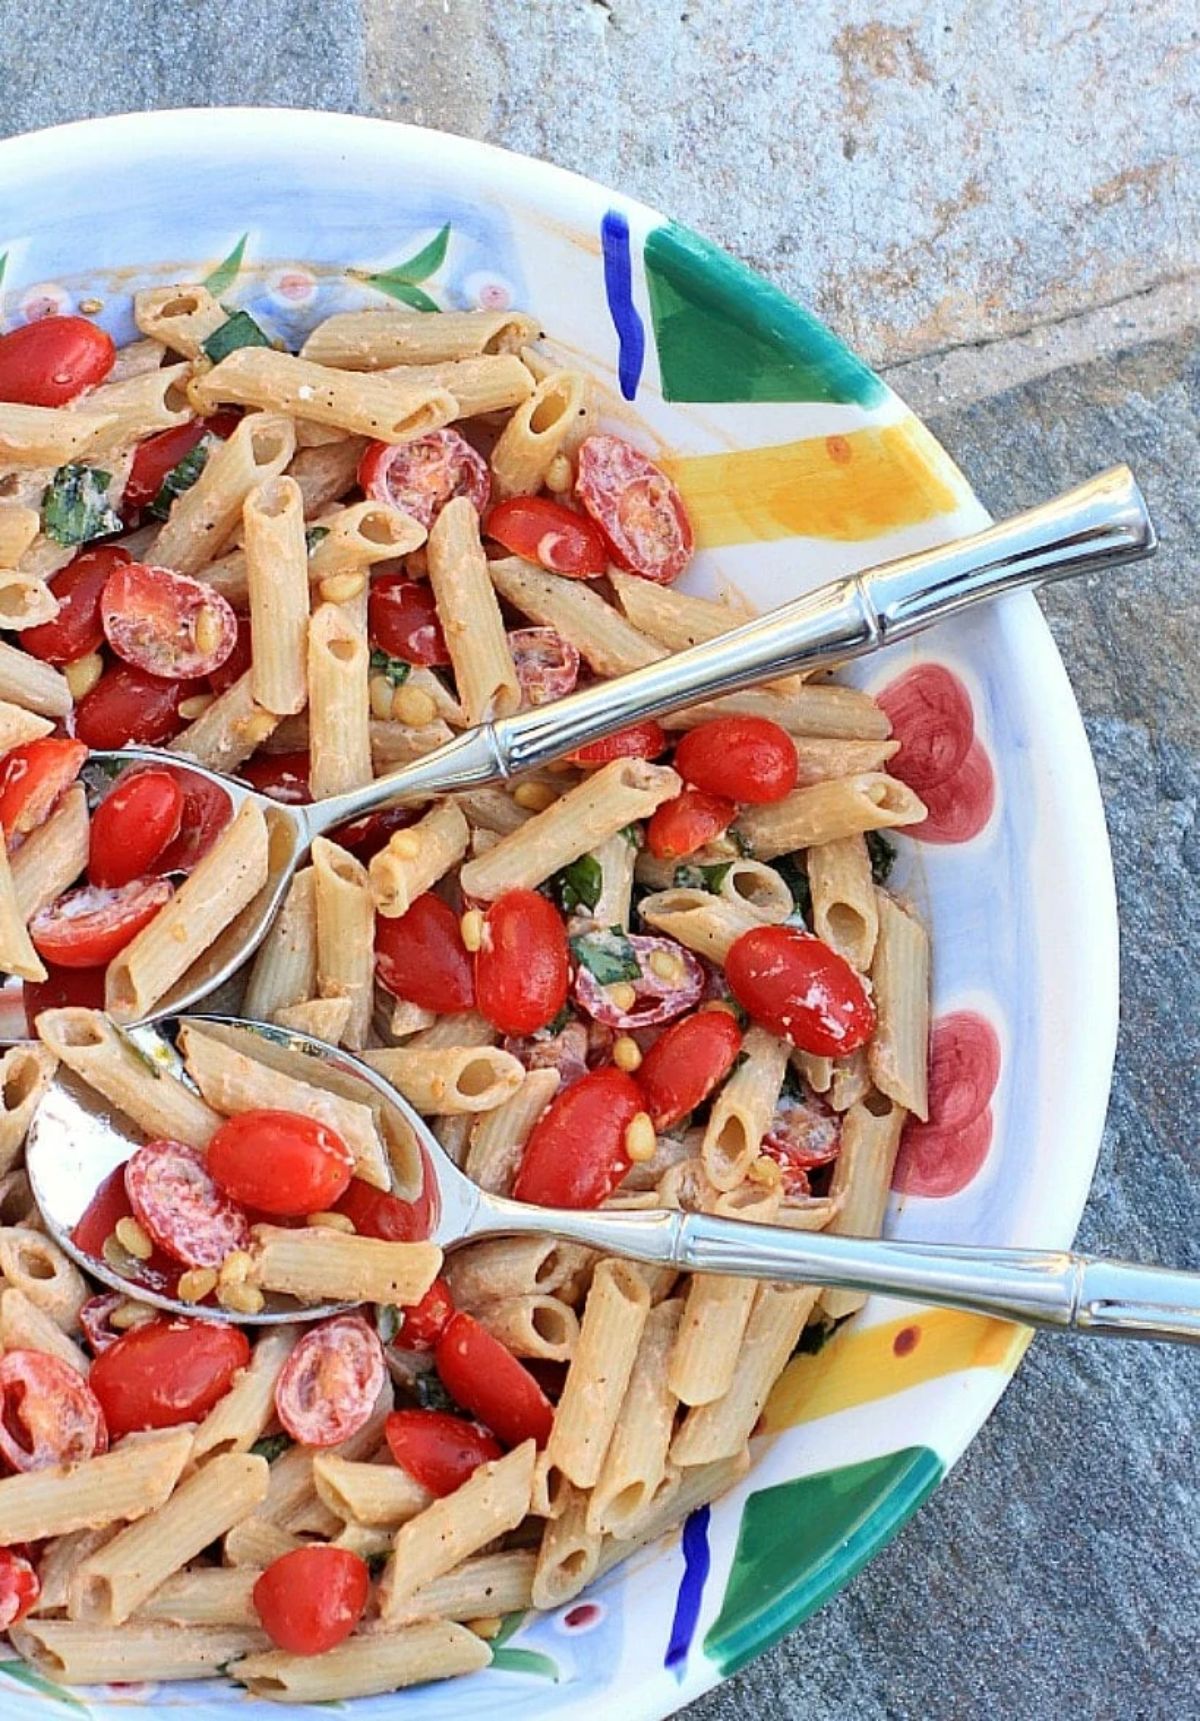 Gluten-free Pasta Salad with Tomatoes, Basil, and Fresh Ricotta in a colorful bowl with two spoons.